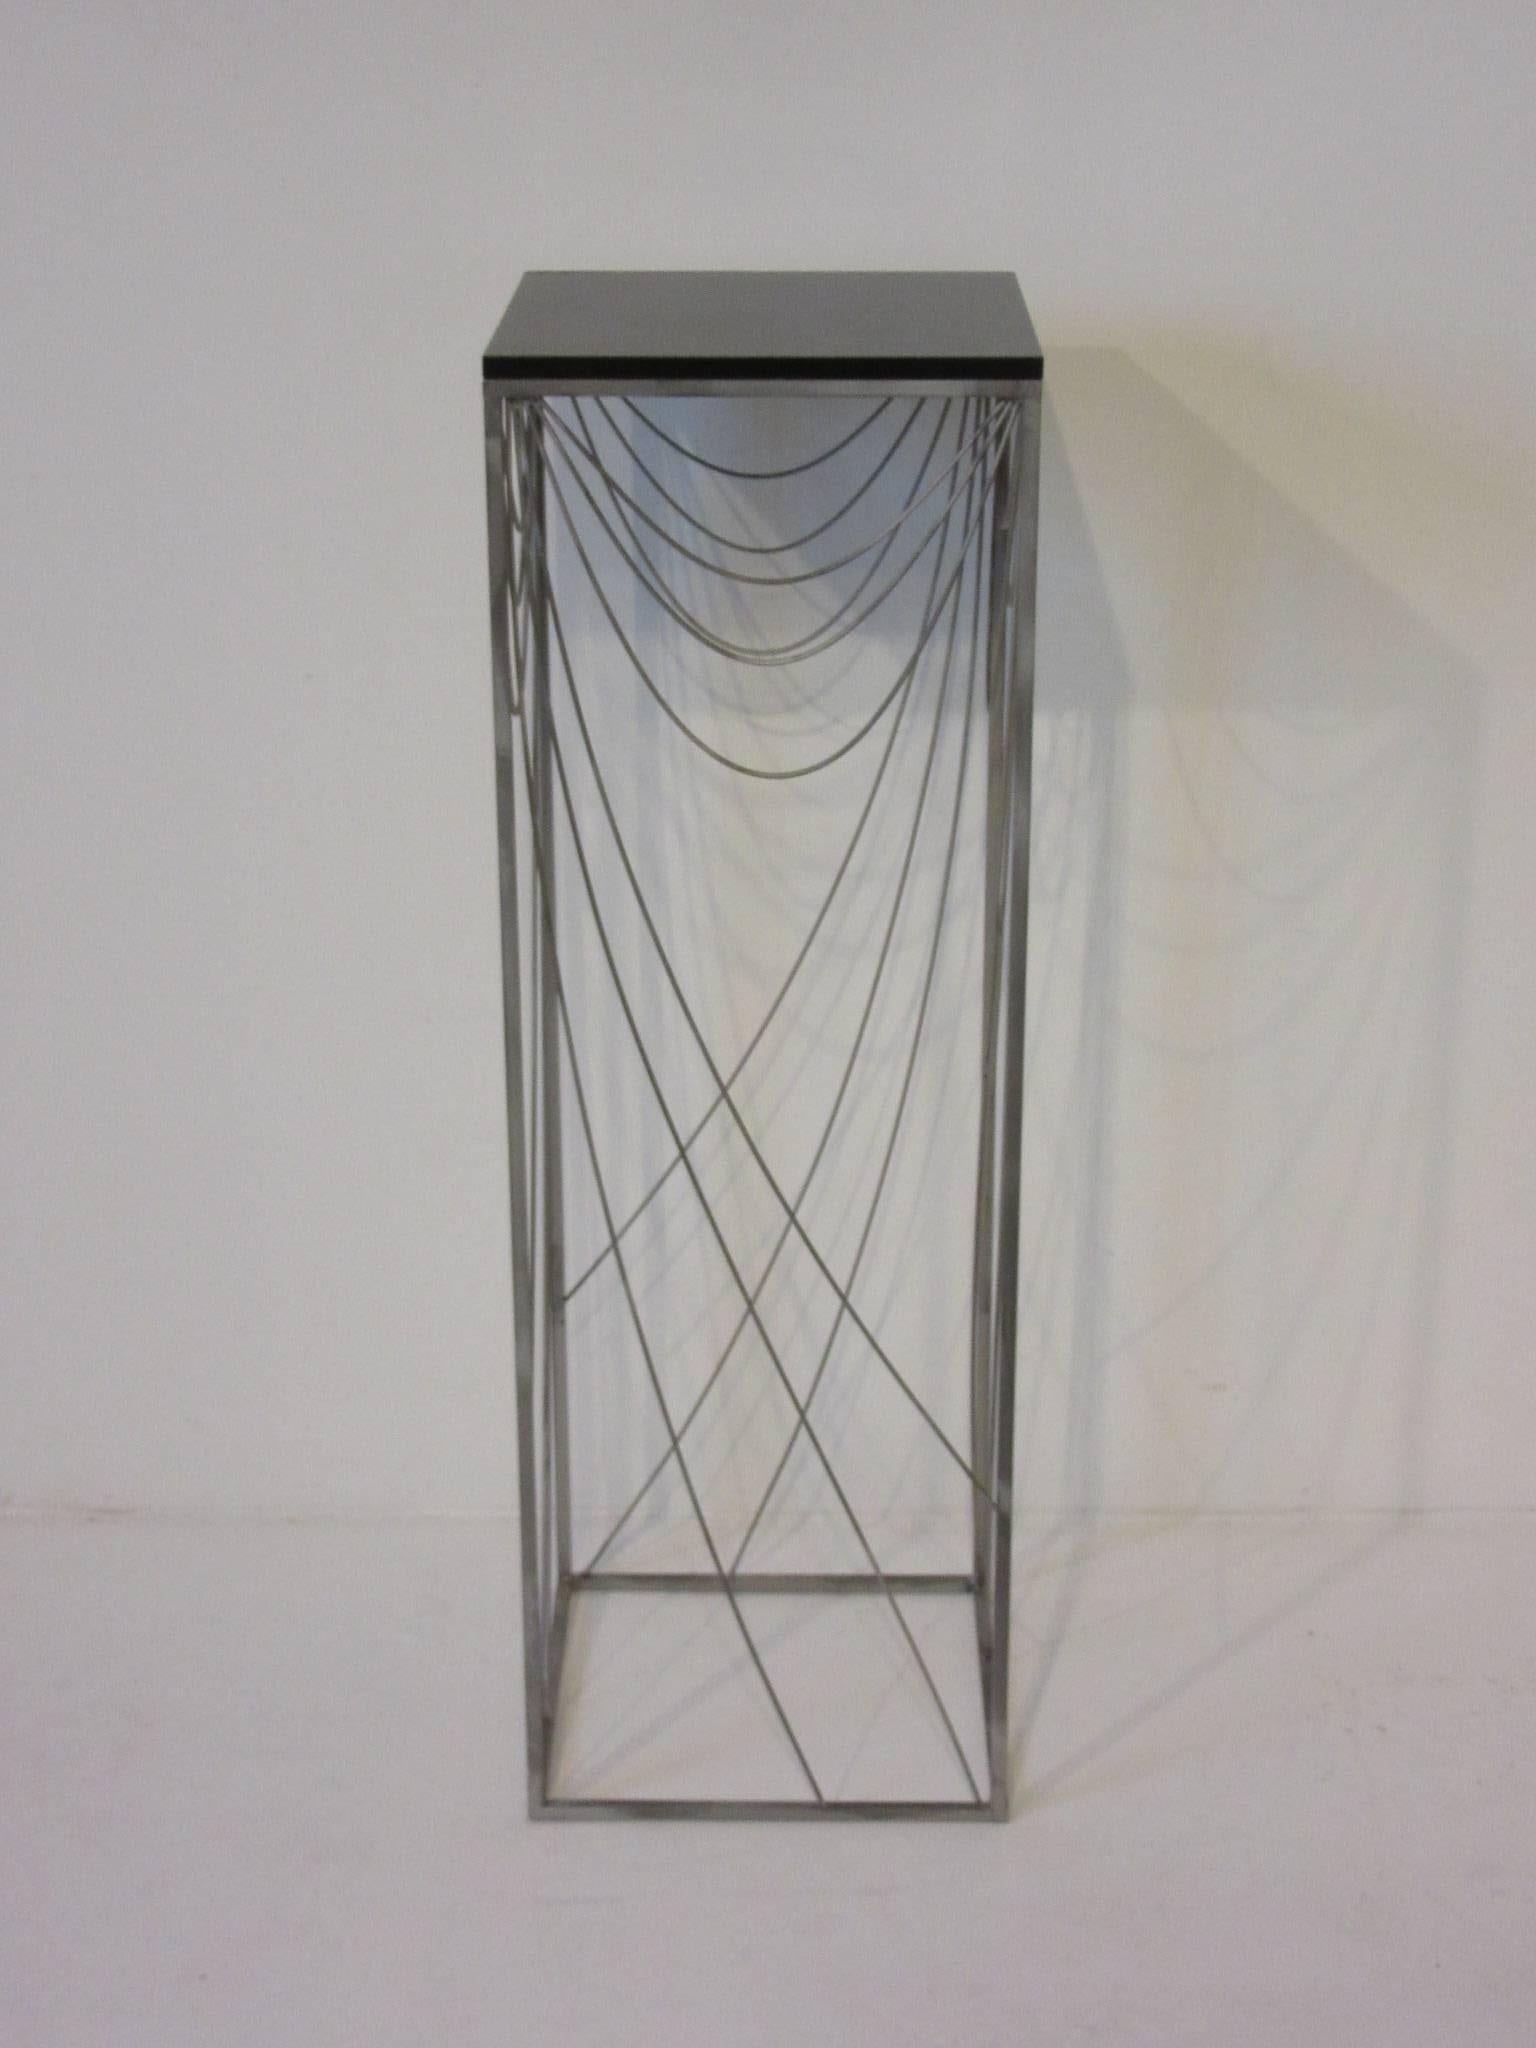 A light wispy spider web swag styled Jere pedestal with satin black wood top and sculptural steel frame design. Makes a statement but will not detract from the item displayed on its top platform. Two available.